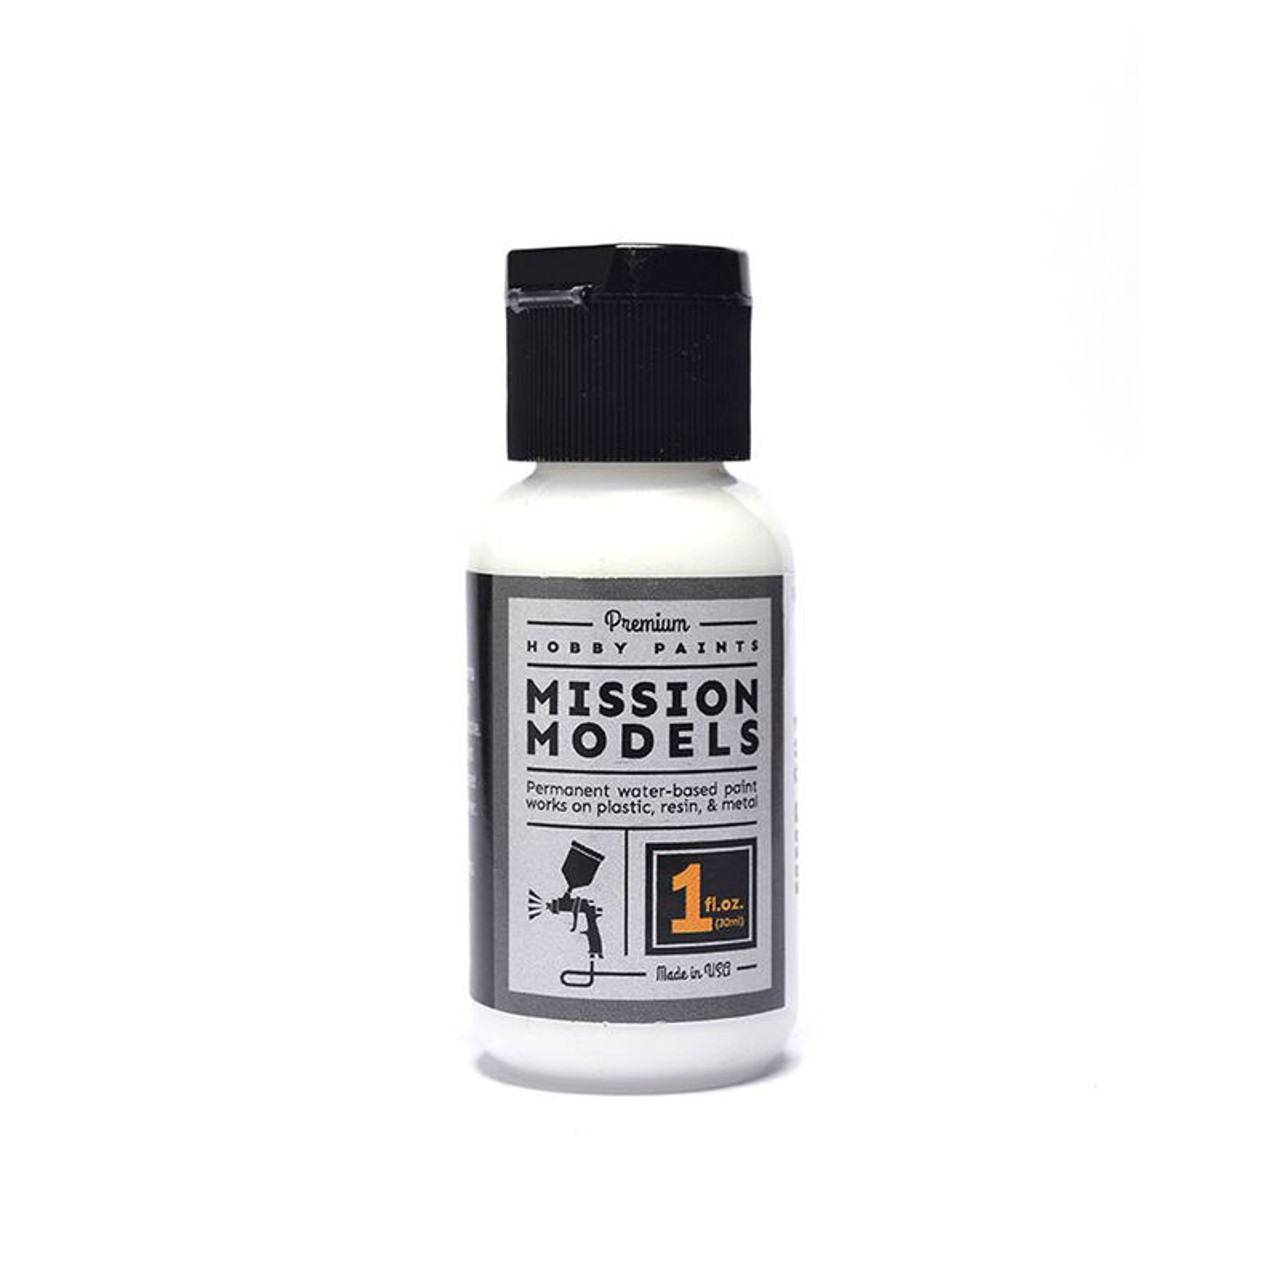 MIOMMP001 MISSION MODELS 1oz water based Acrylic Paint - White